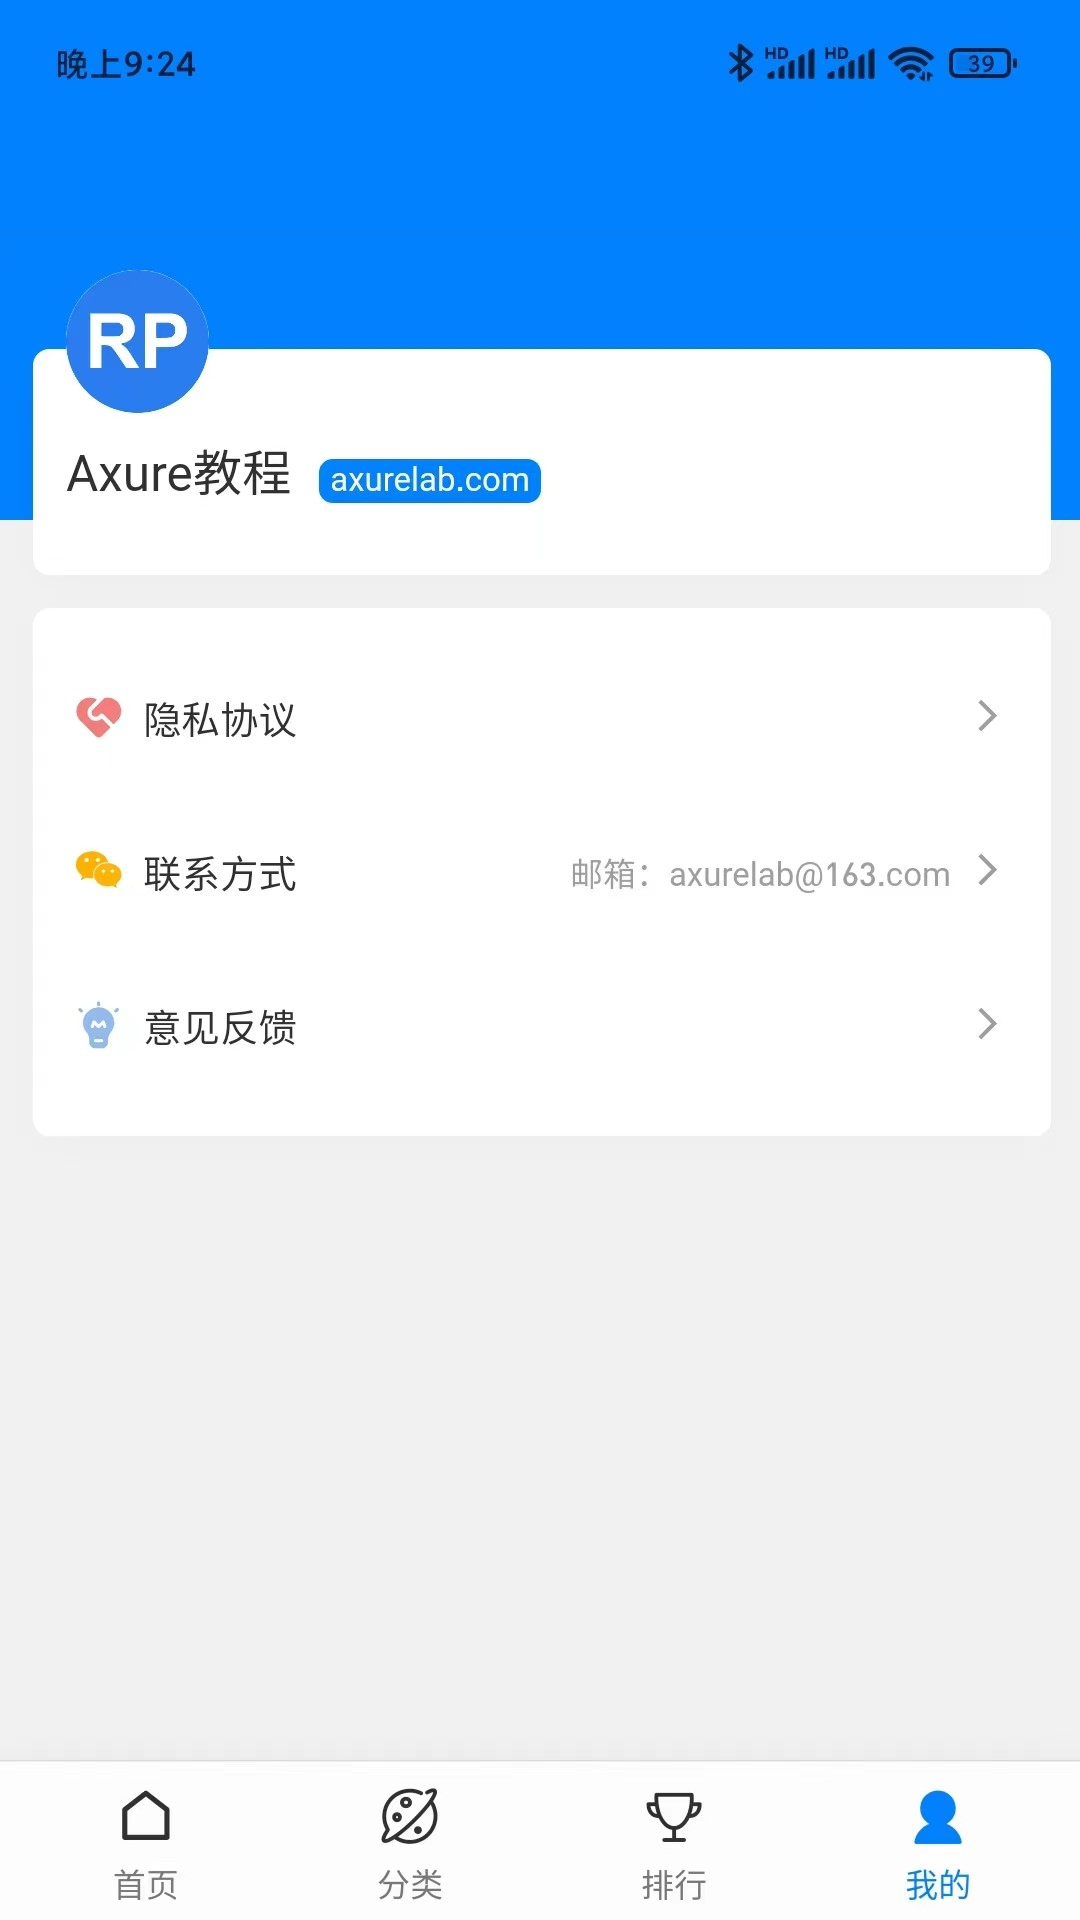 Axure教程